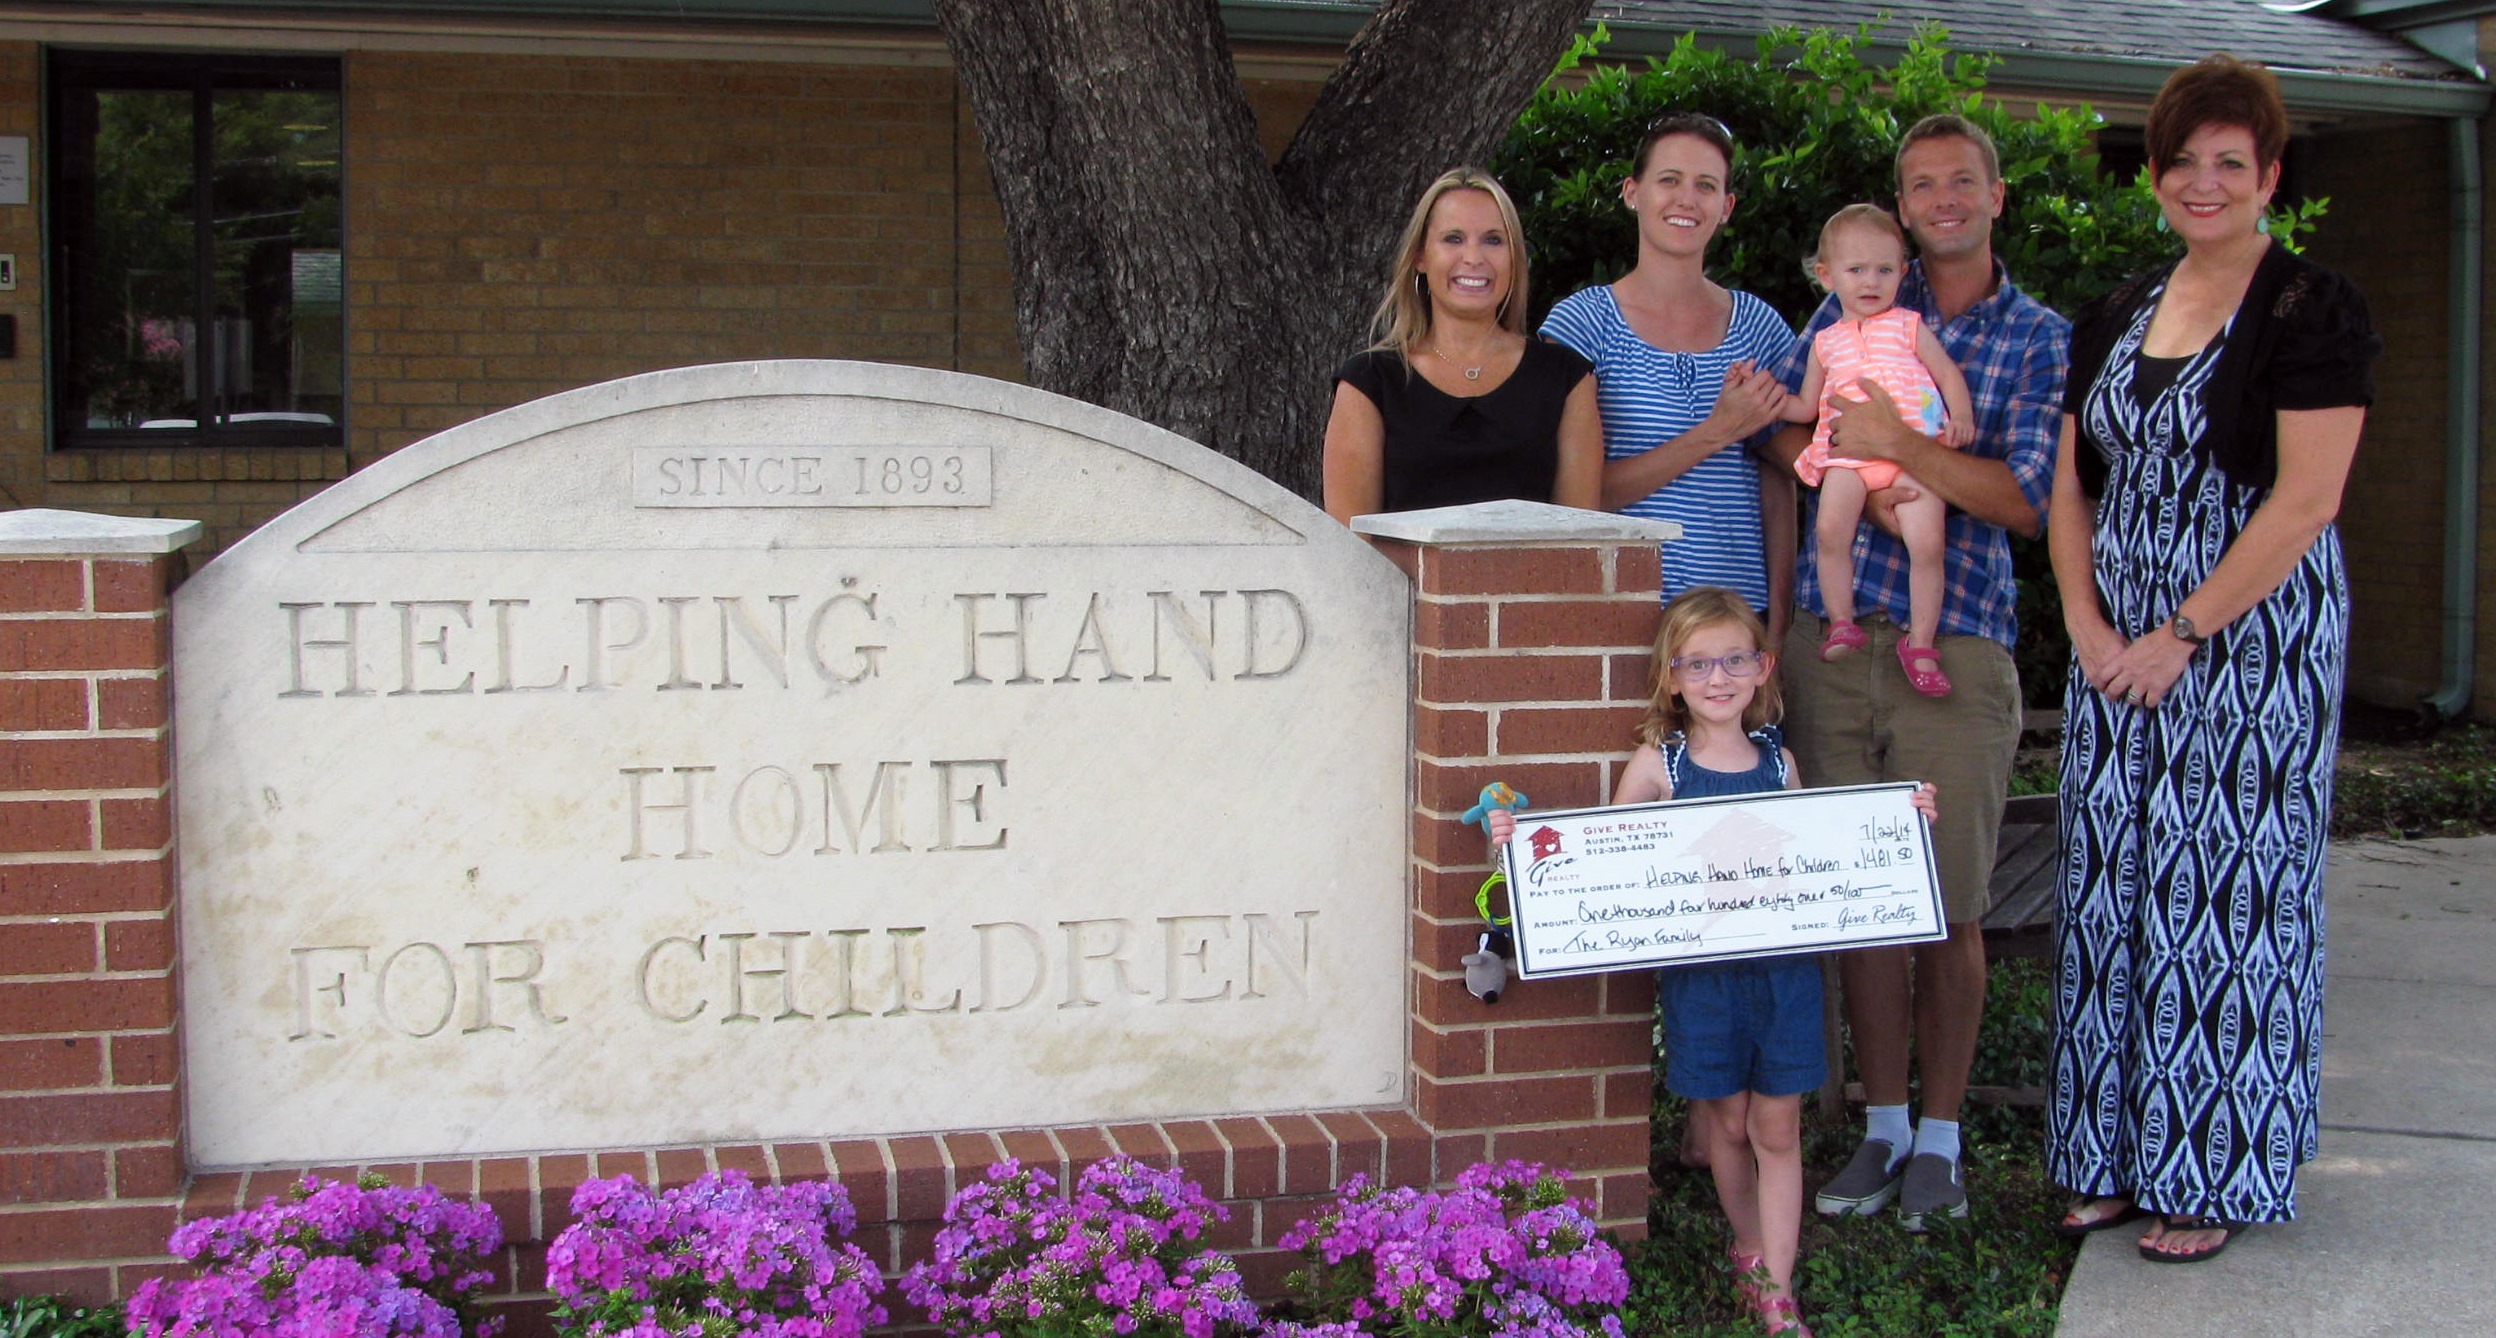 Helping Hand Home for Children Donation